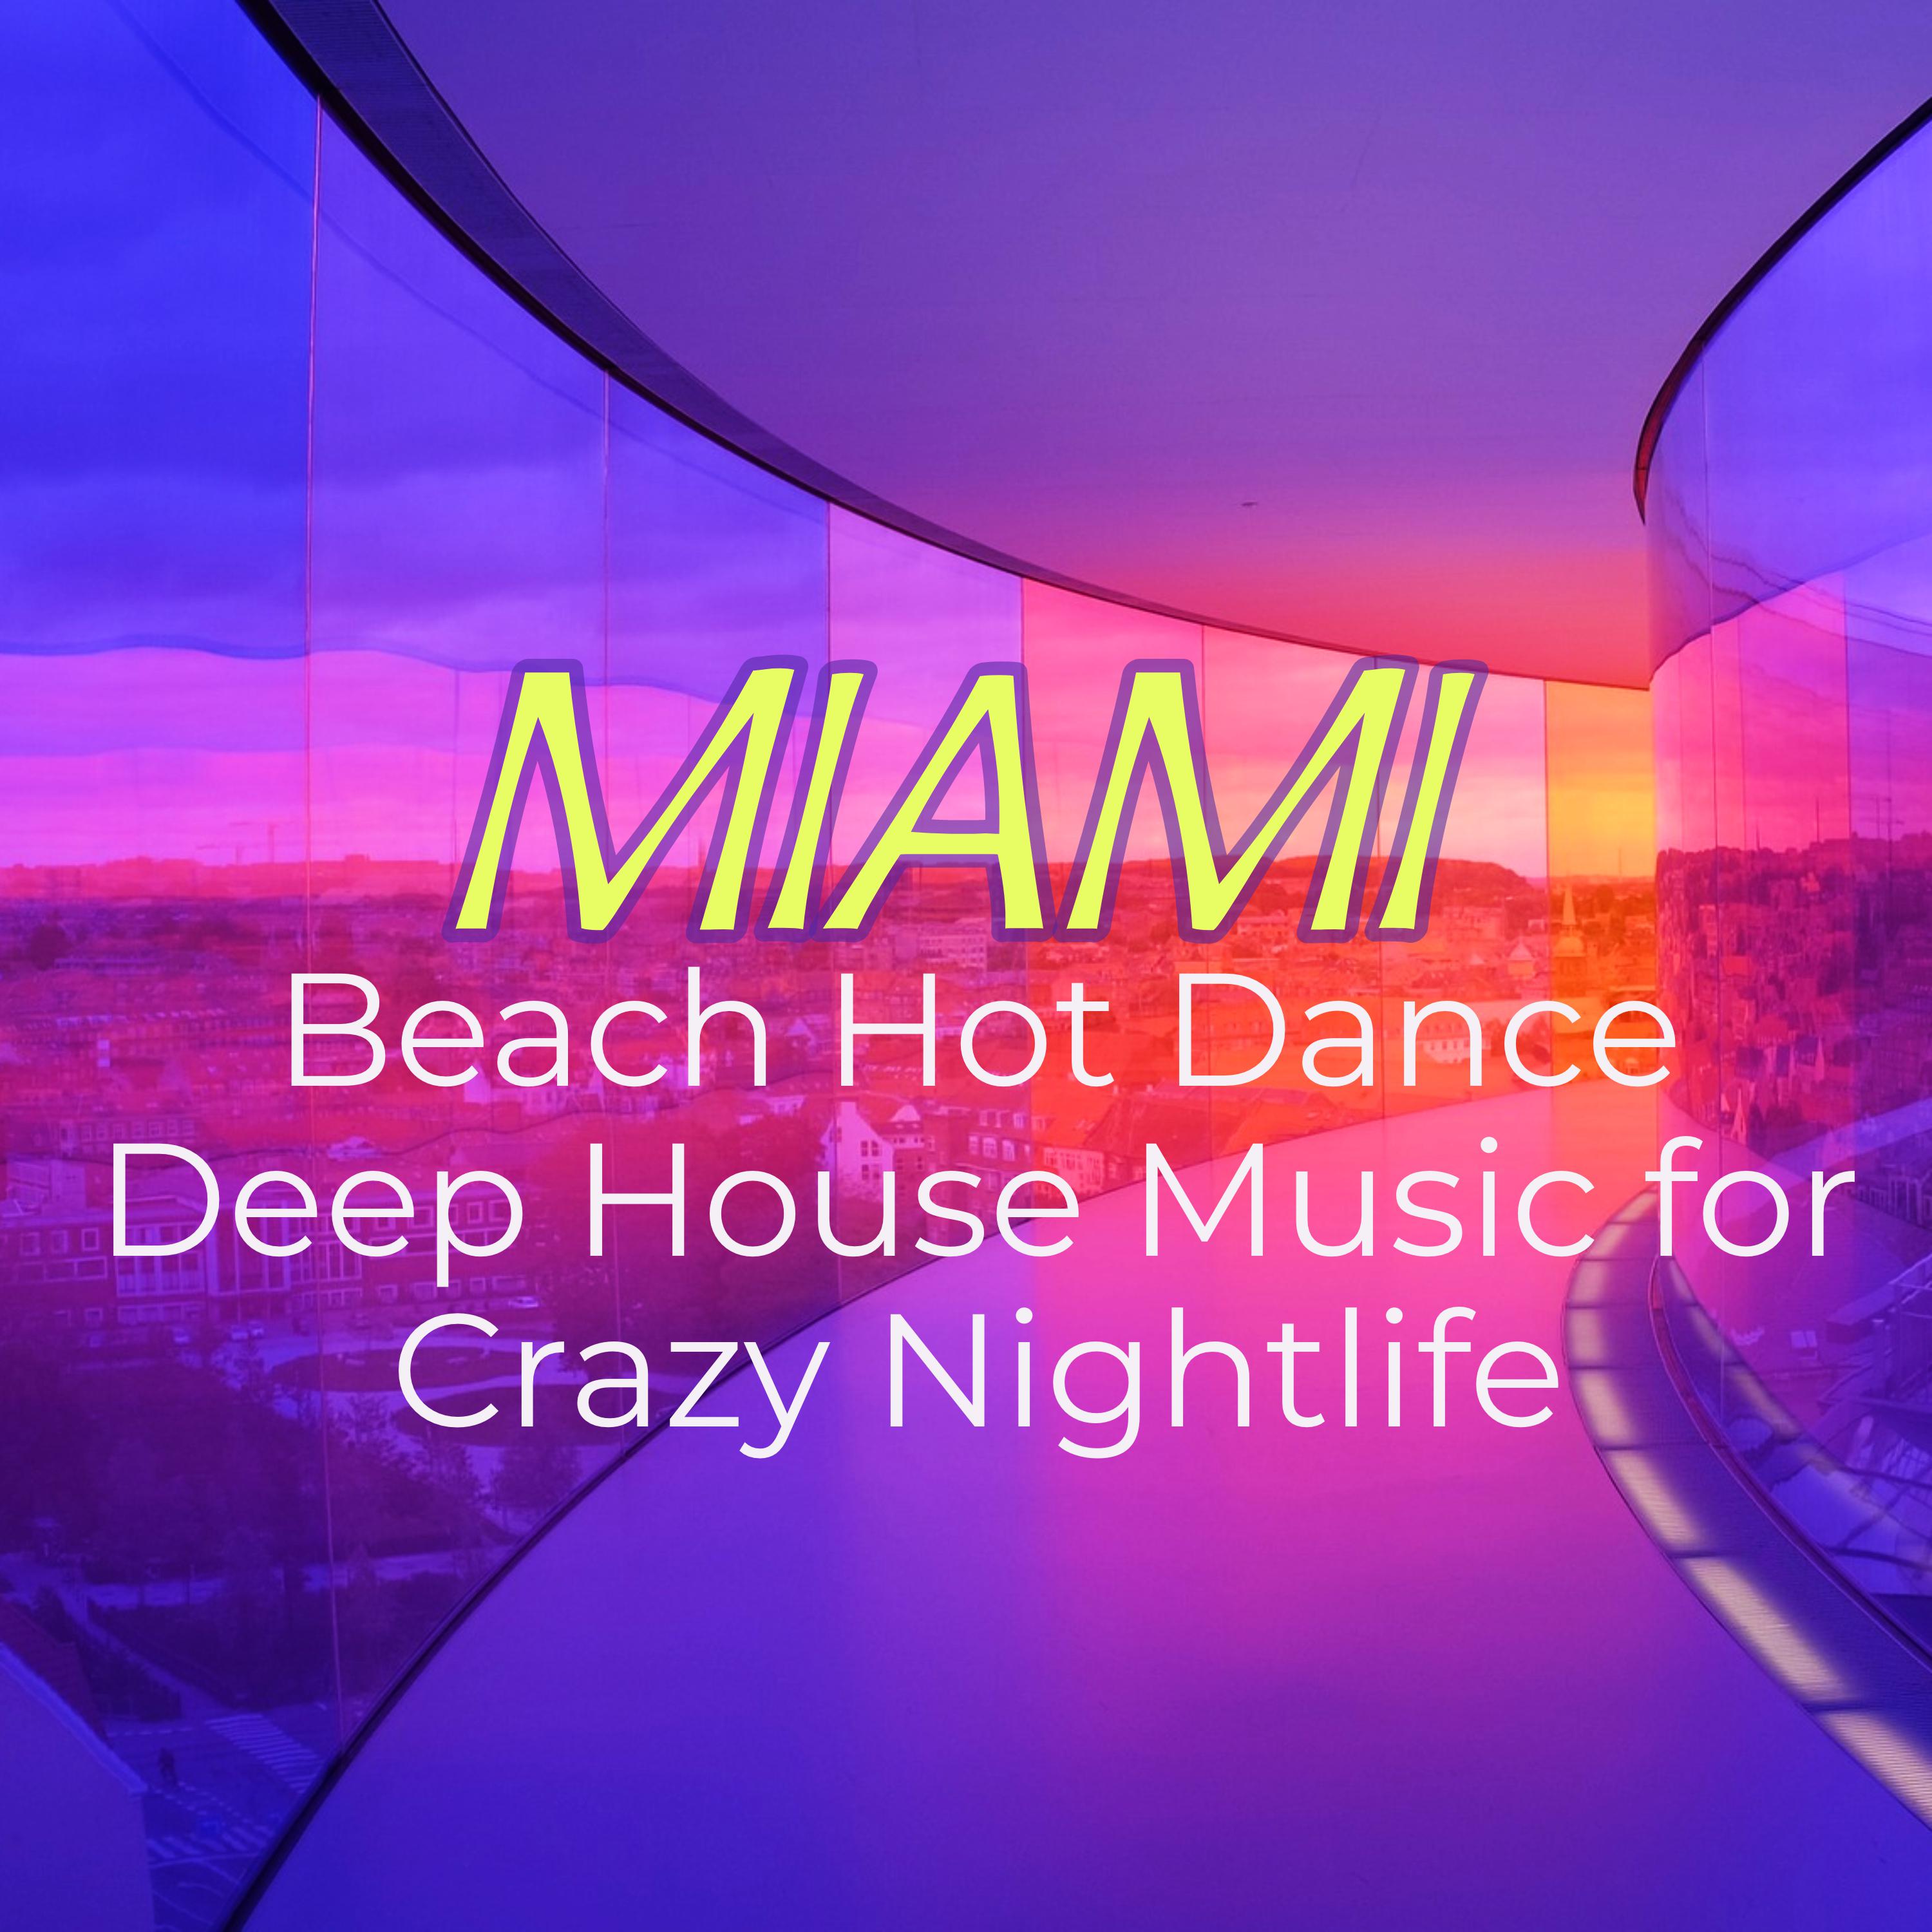 Miami Beach Hot Dance Deep House Music for Crazy Nightlife